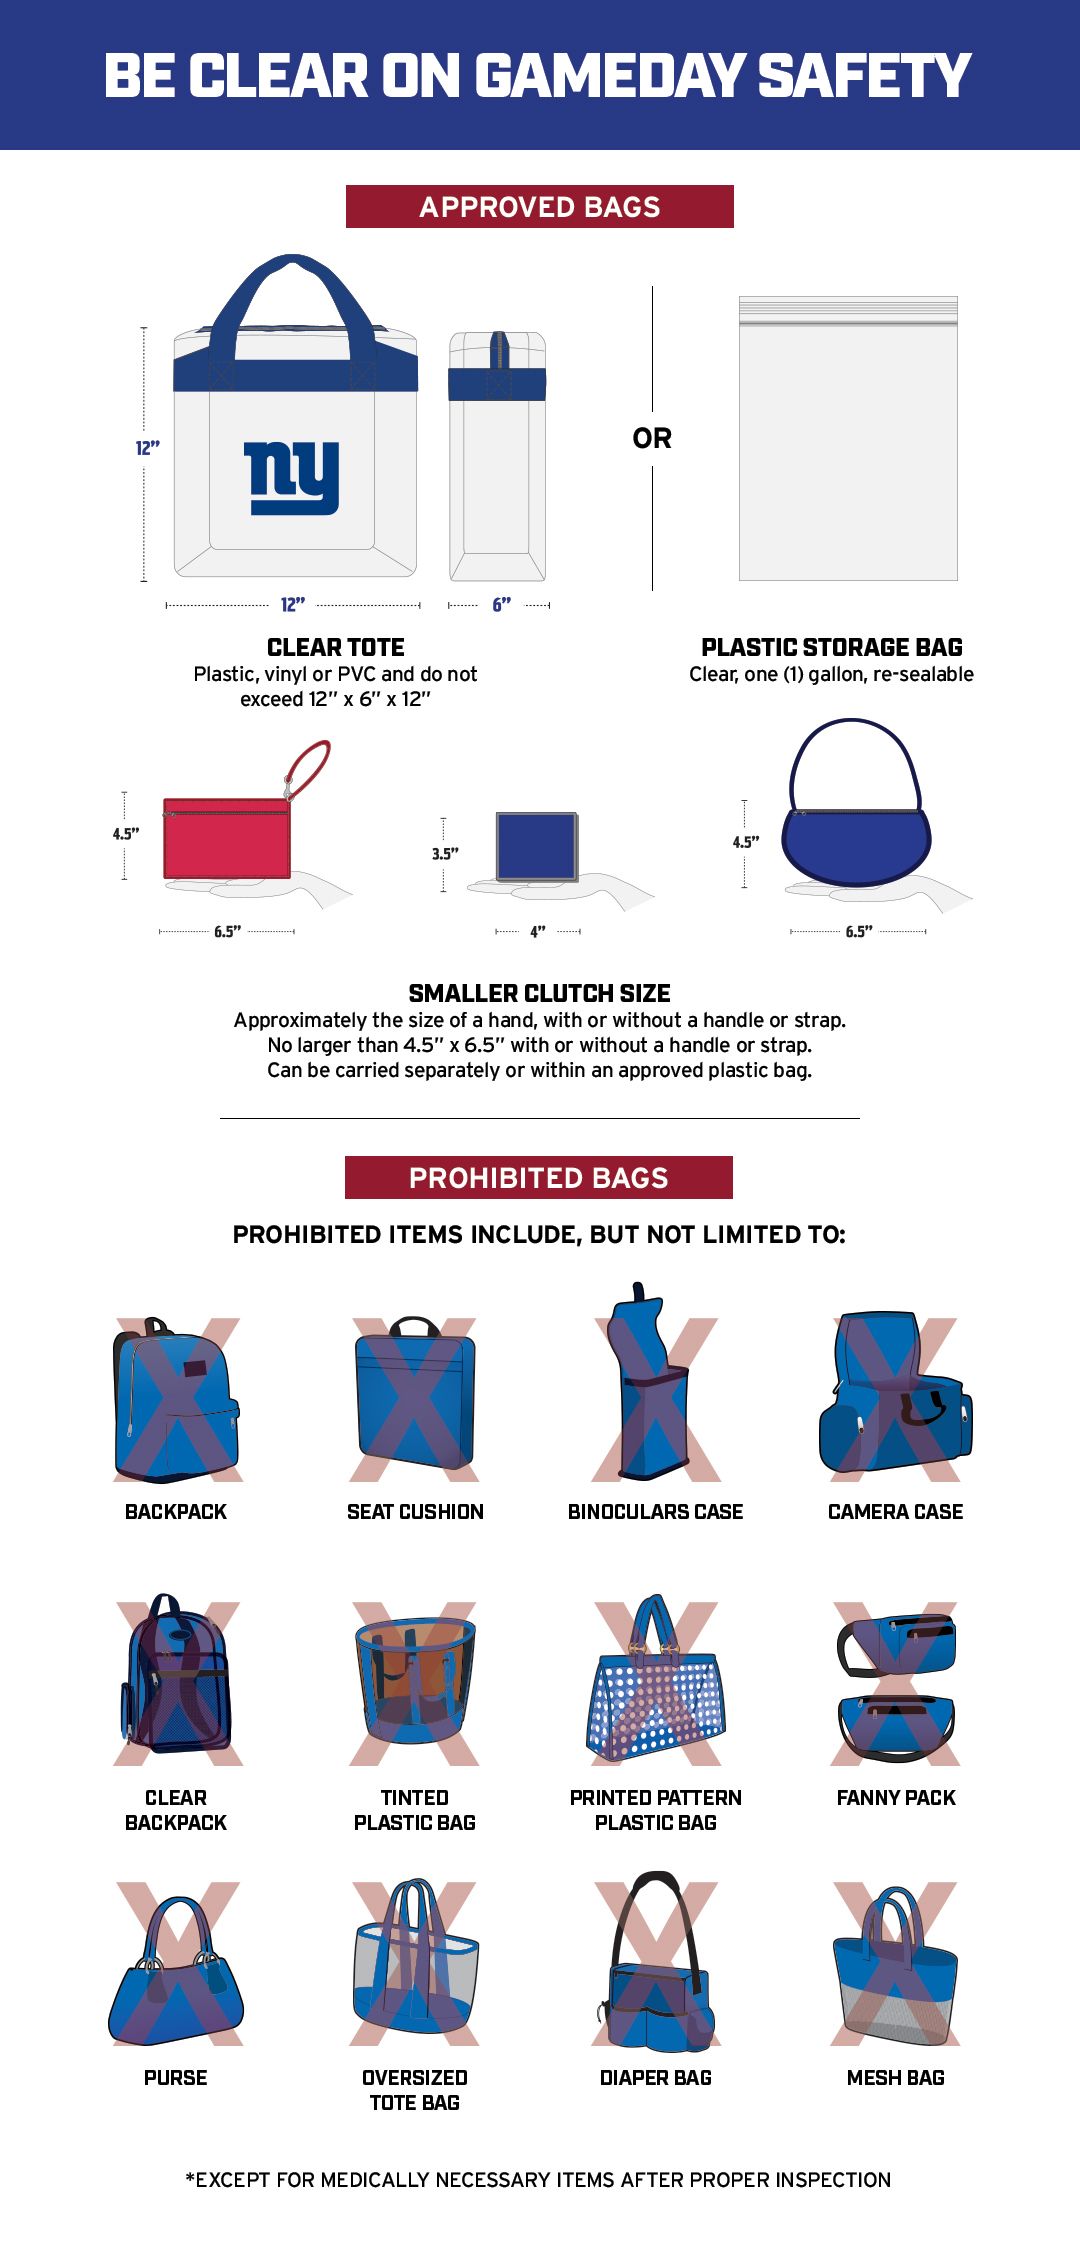 Sports fan alert: Check the purse/bag policy before heading to the game